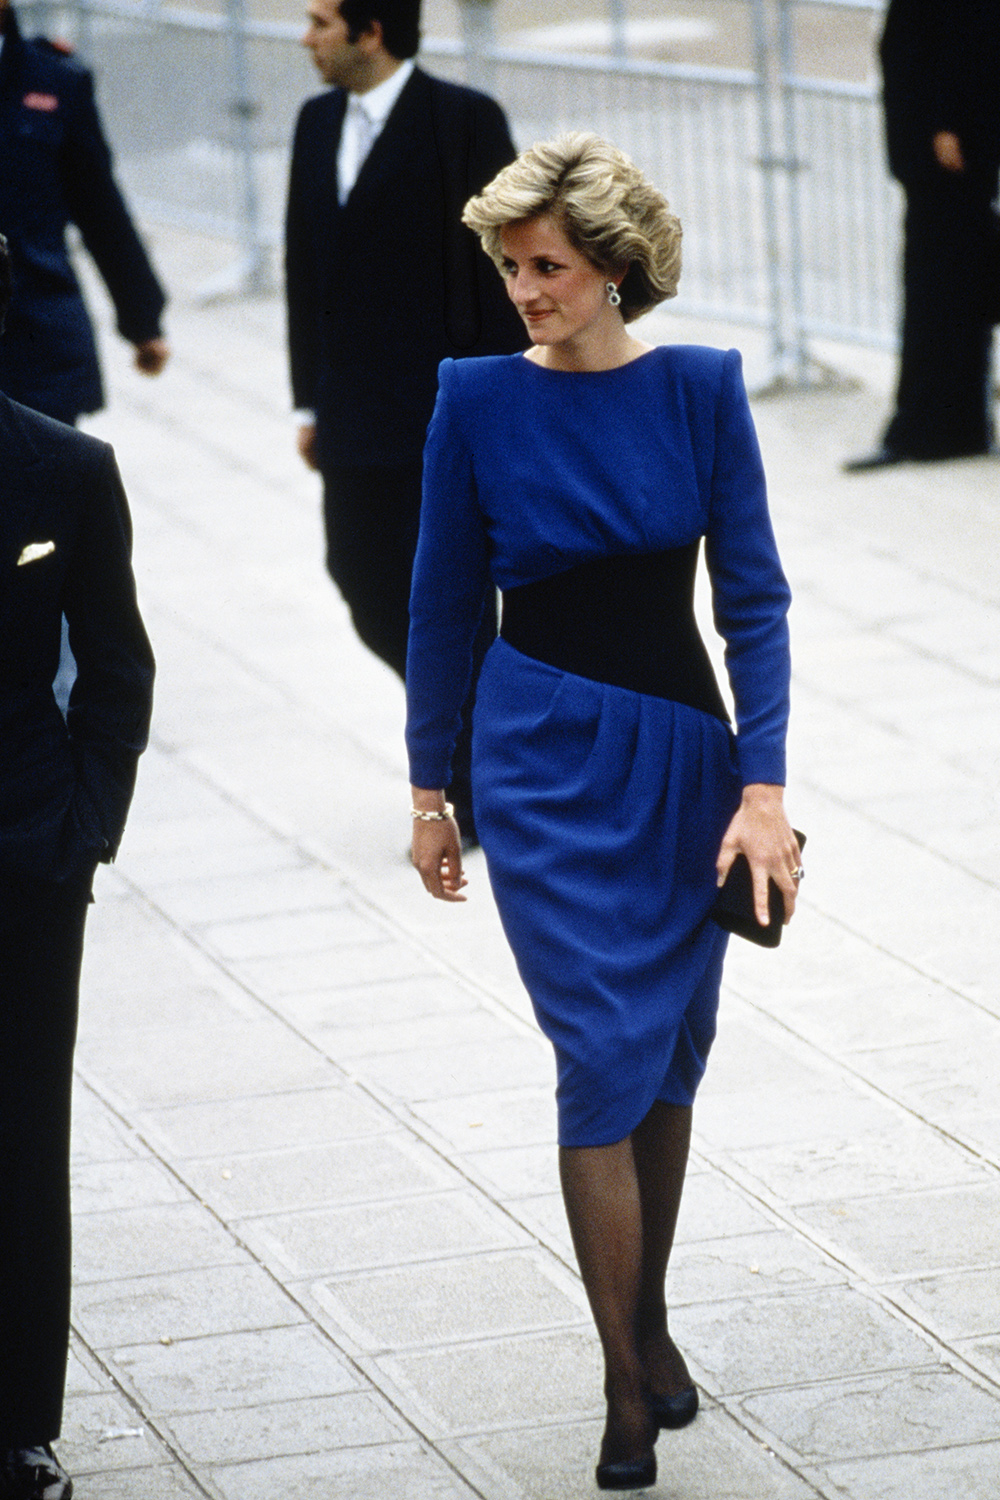 May 5th, 1985 - Princess Diana during a visit to Venice wearing a Bruce Oldfield dress.